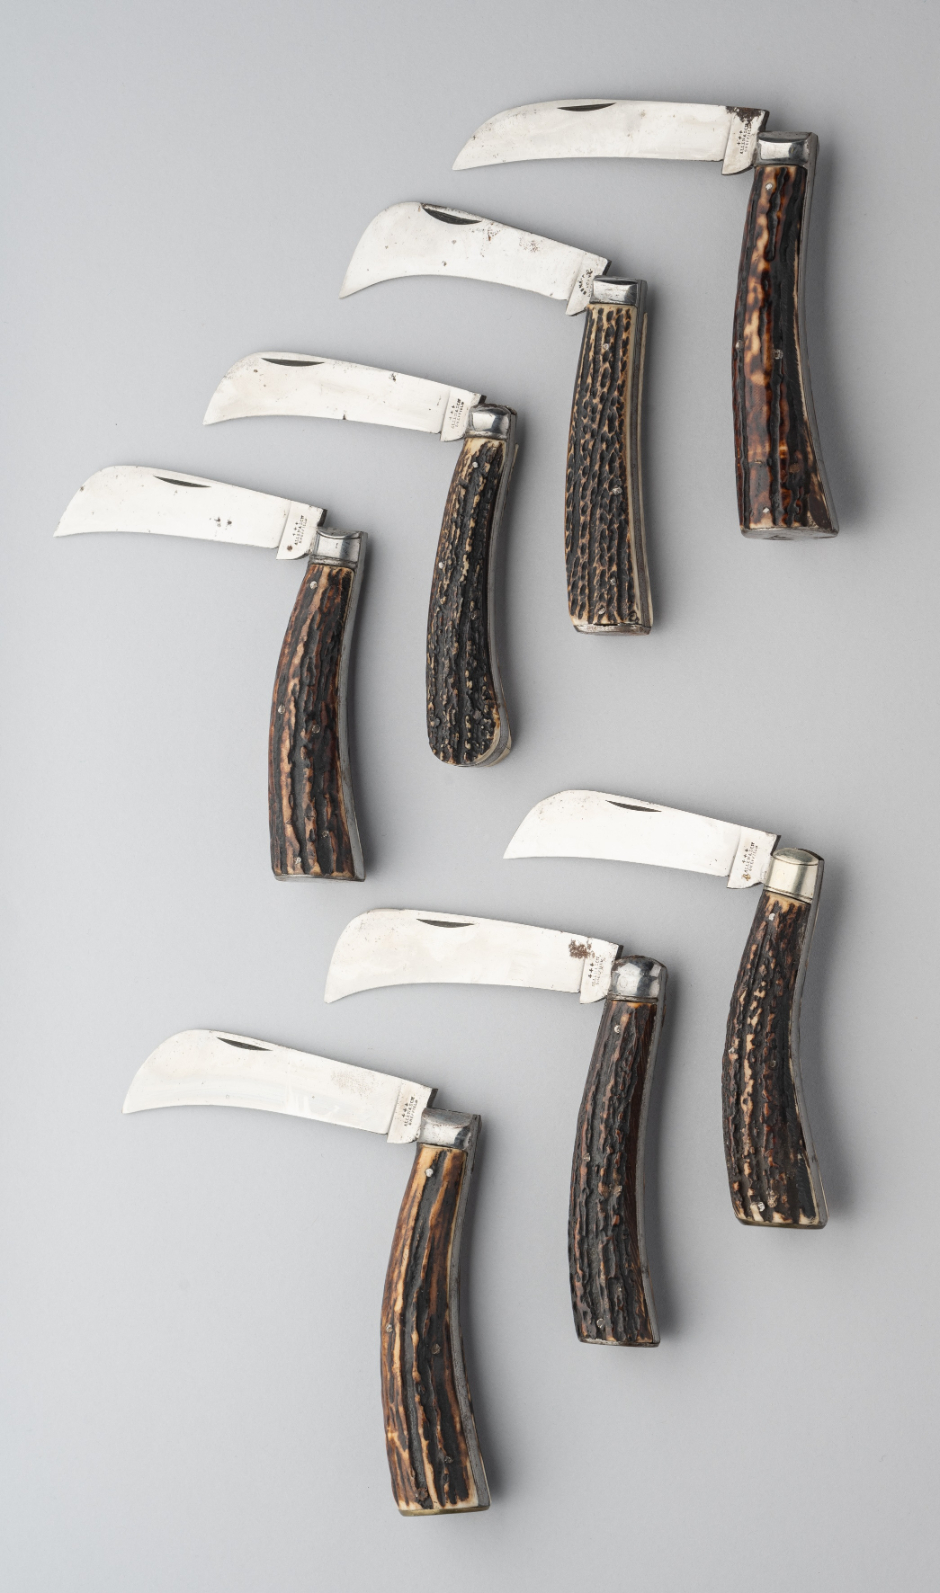 FIVE PRUNING KNIVES, LOCKWOOD BROTHERS, SHEFFIELD, AND NINETEEN FURTHER PRUNING KNIVES, LATE